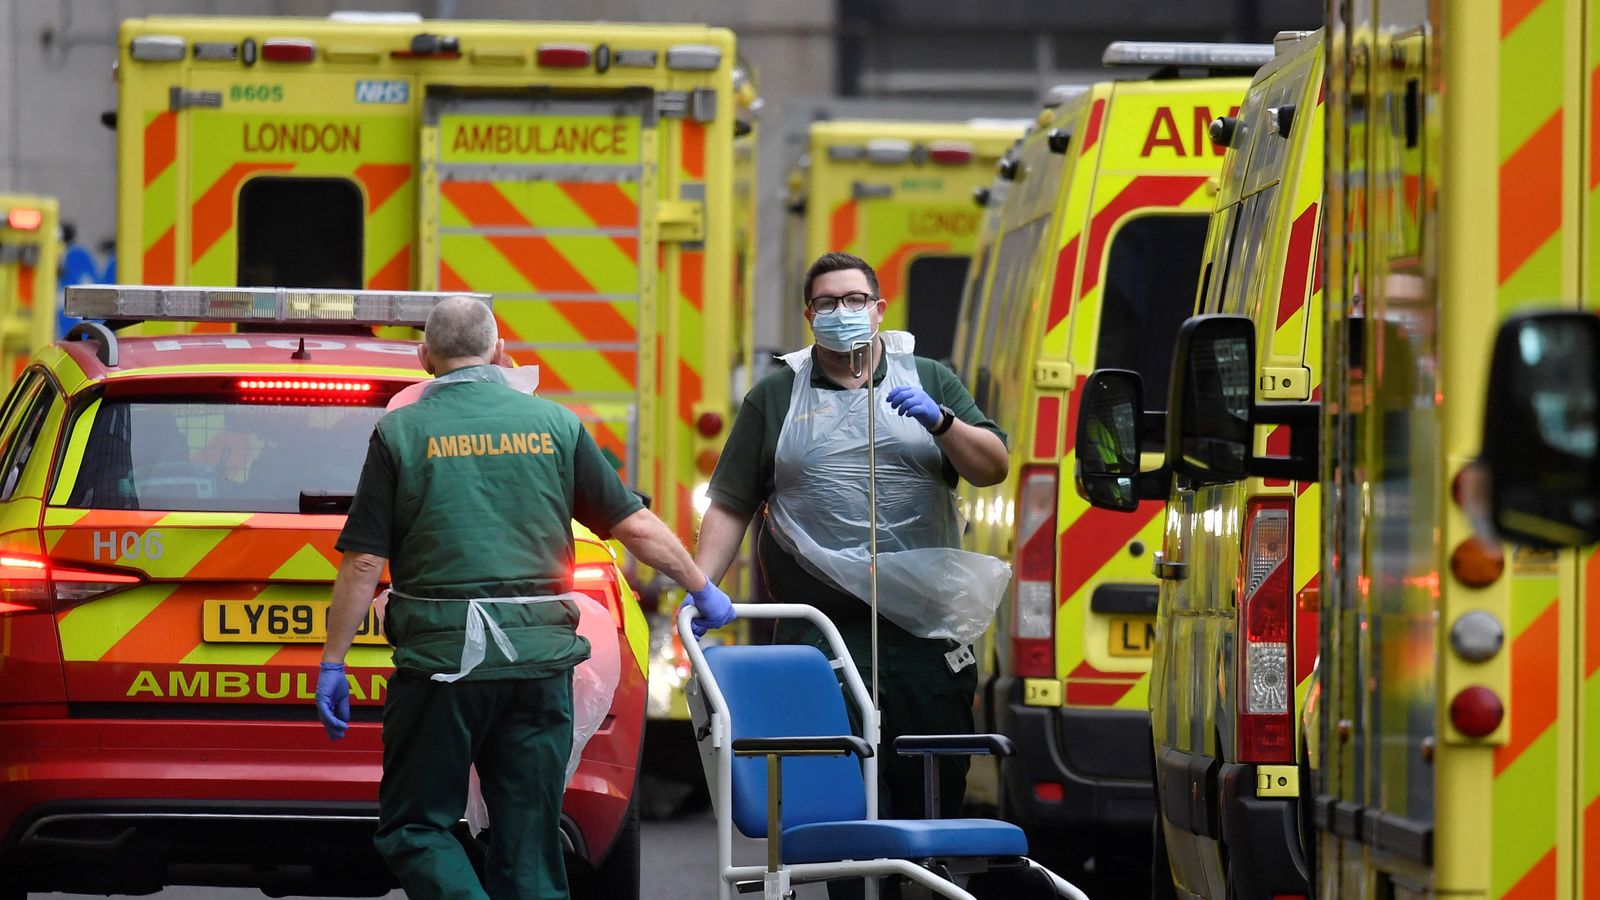 More than 10,000 ambulance workers in England and Wales to strike on two days in December